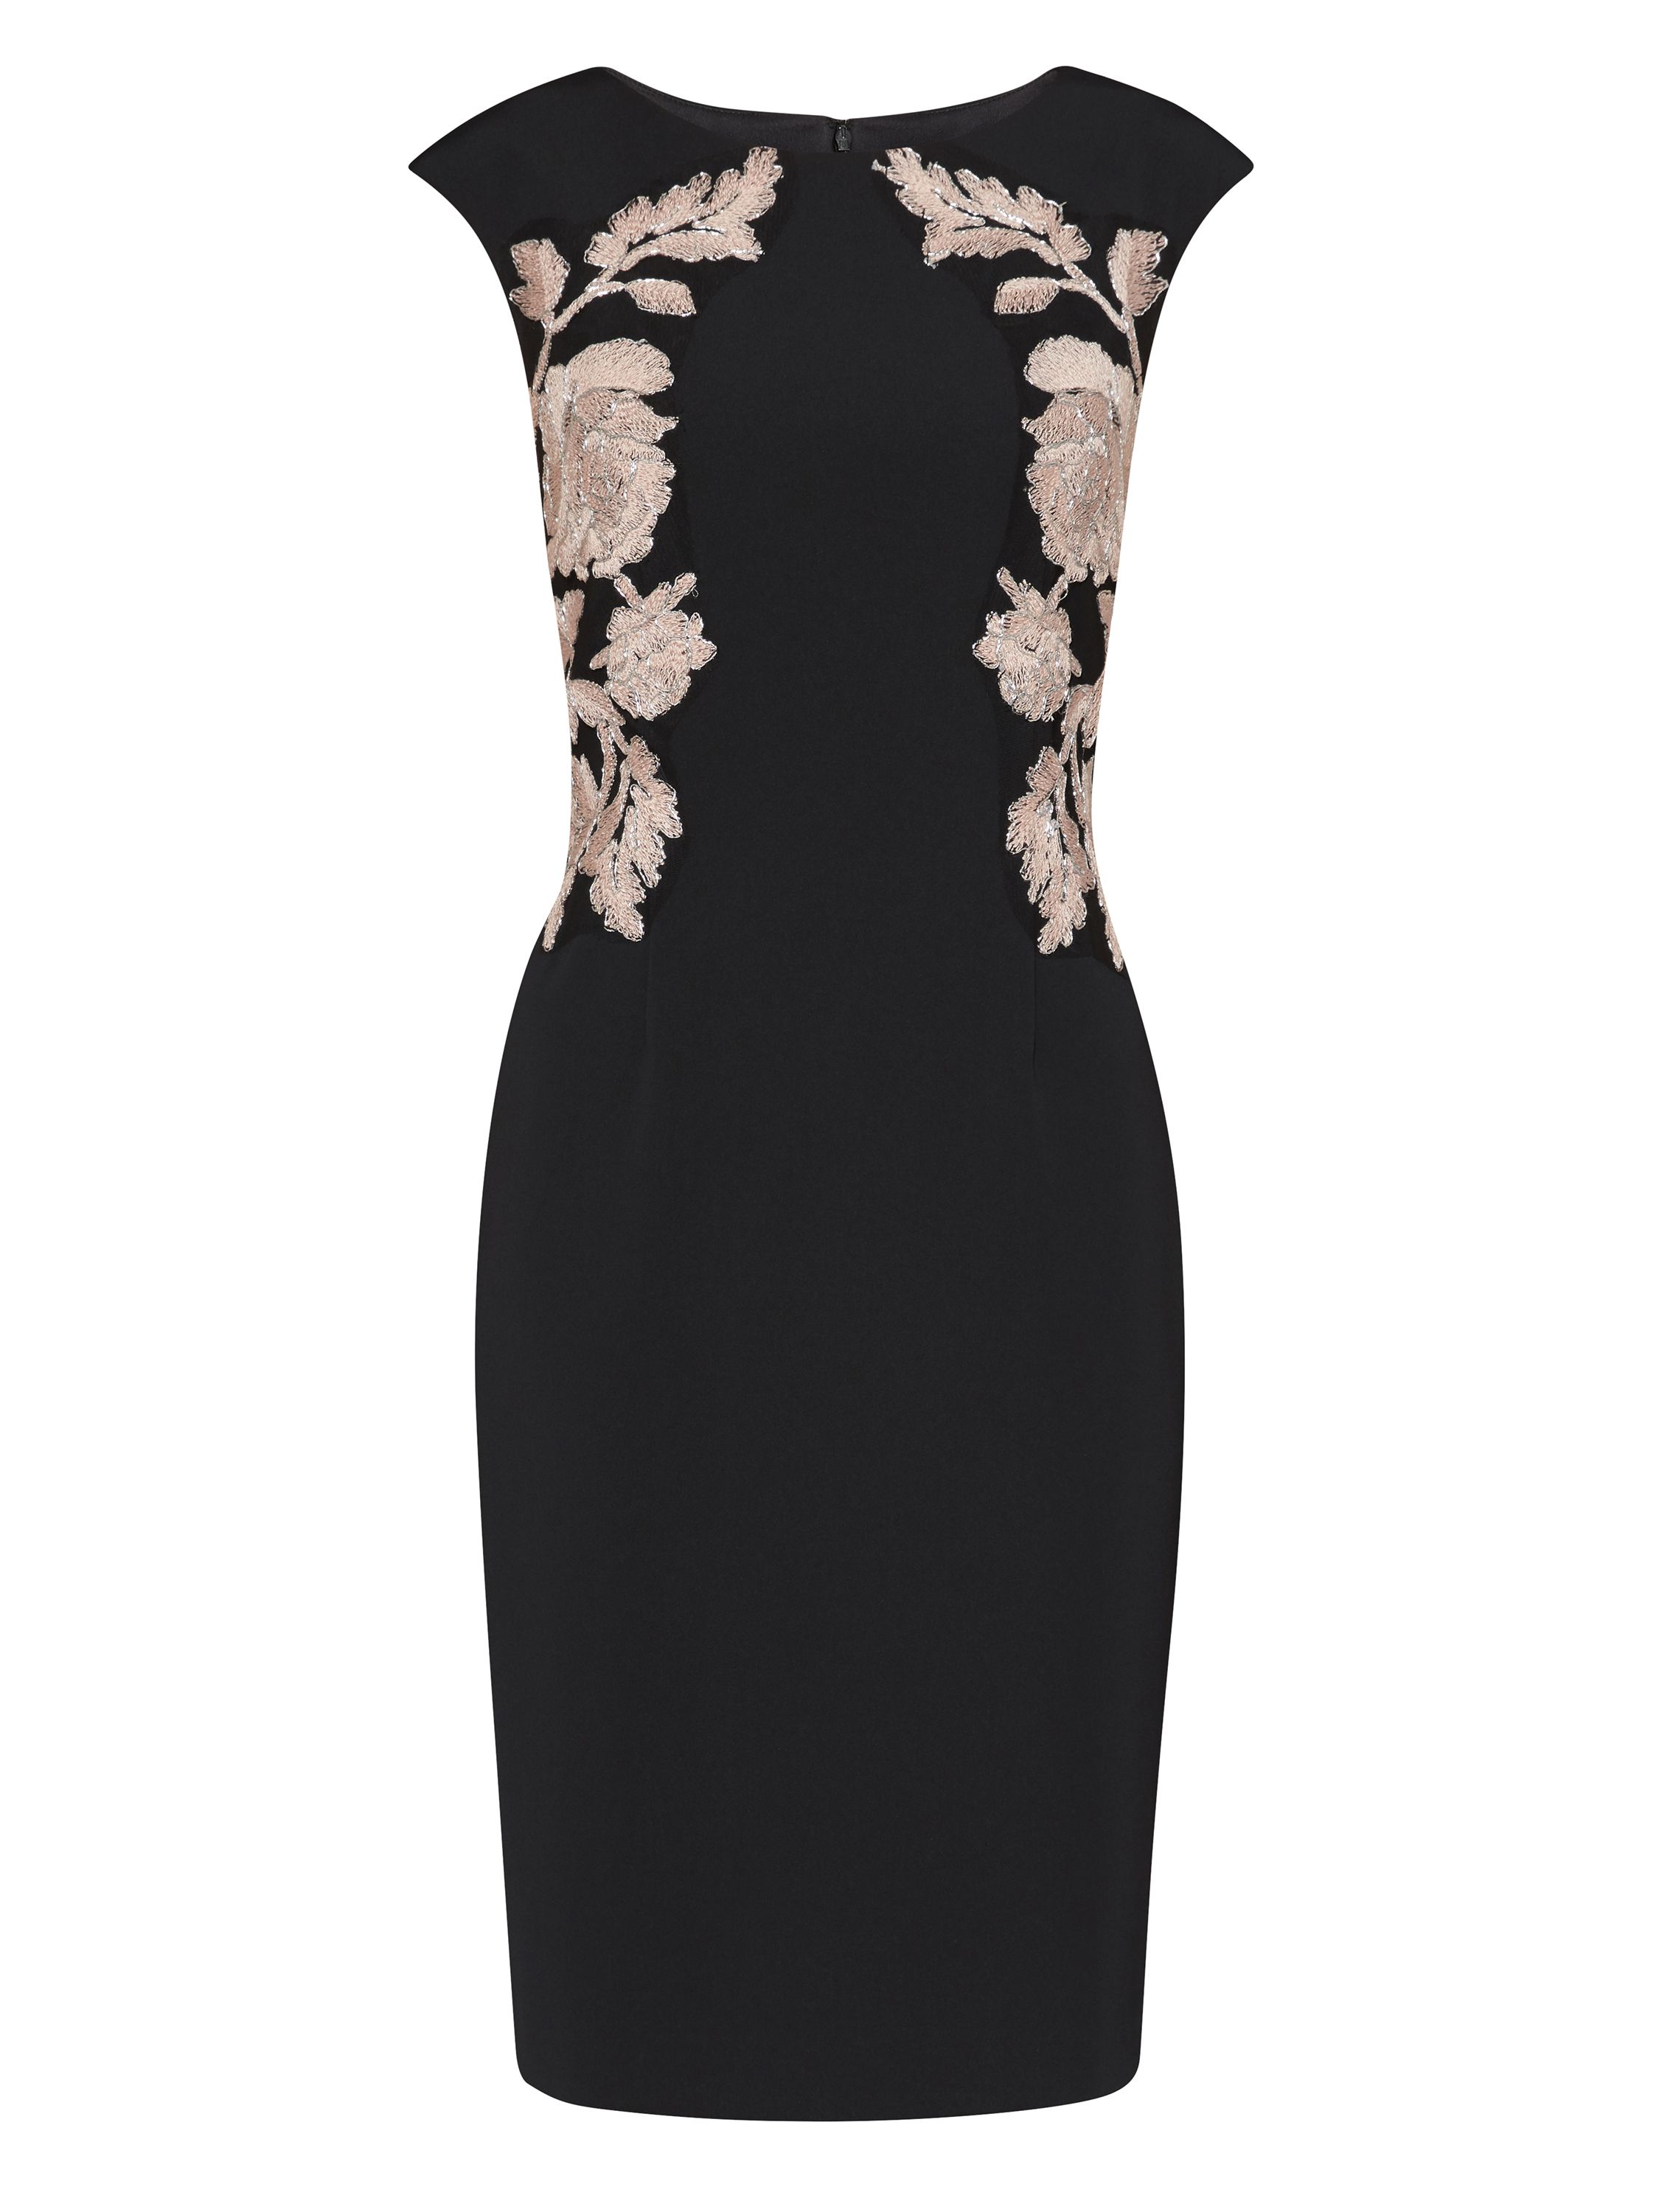 This elegant embroidered dress by Gina Bacconi will make you feel fabulous. Both sides of the dress have been embroidered with a beautiful symmetrical floral design. The dress is fully lined and fastens with a concealed back zip. It has back split for added class.